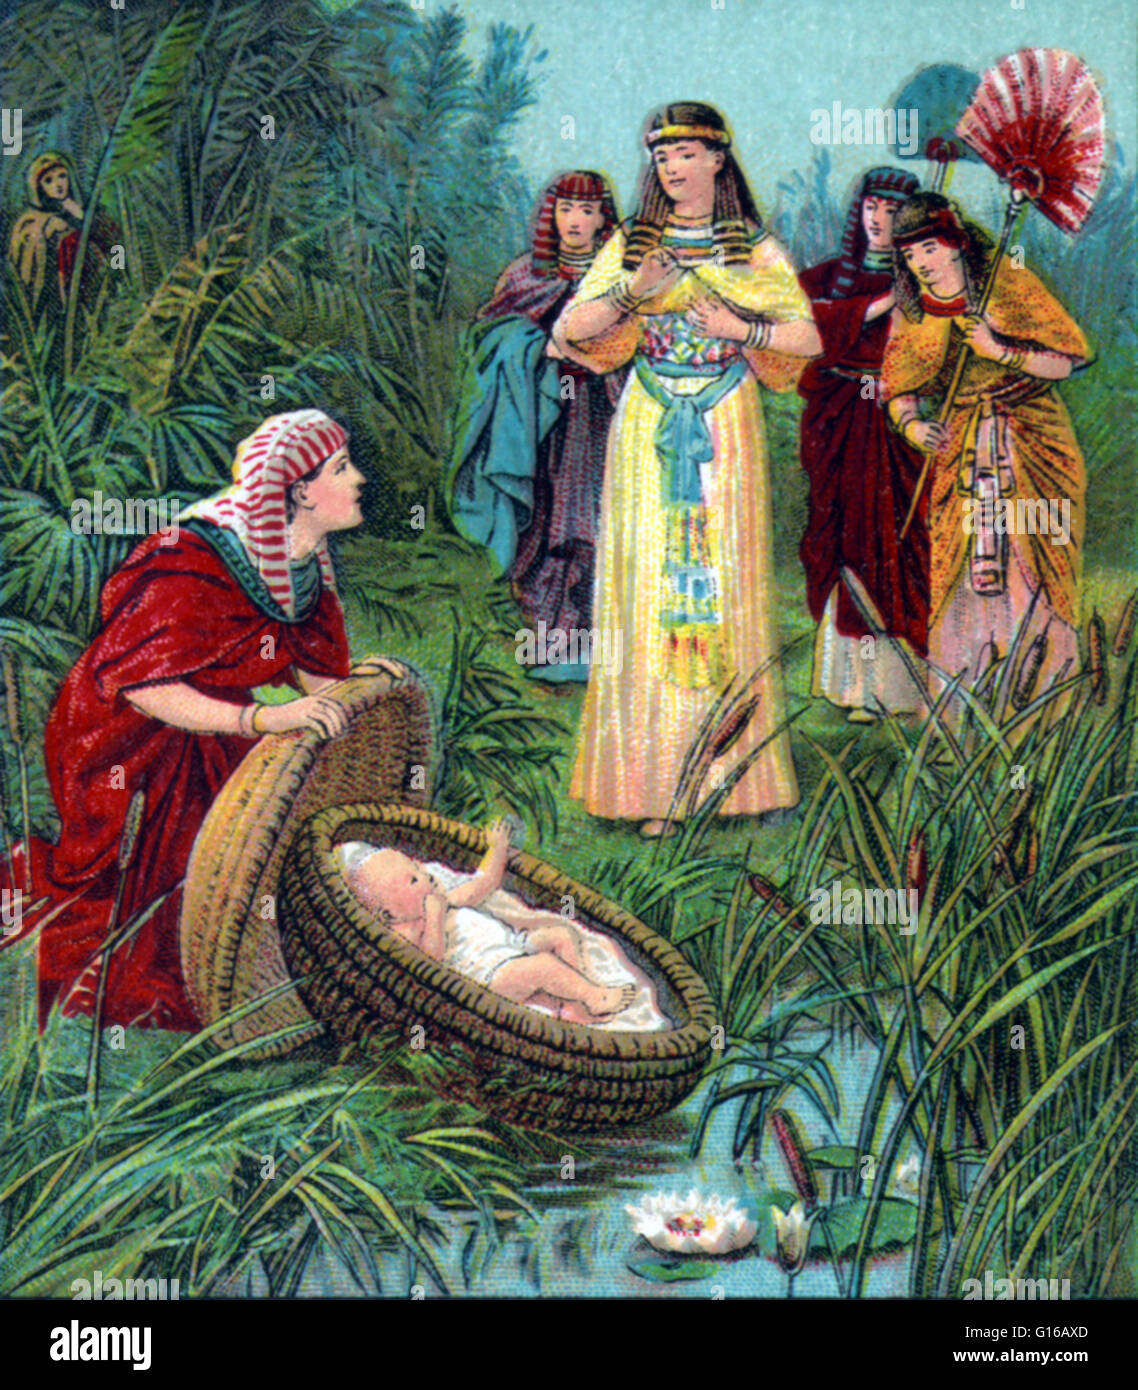 One of thirteen lithographs with scenes from Old Testament Biblical stories about Moses's life. The back of each card has a Bible lesson pertaining to the image on the front. Published by American Baptist Publication Society, 1900. Exodus 1, the pharaoh o Stock Photo